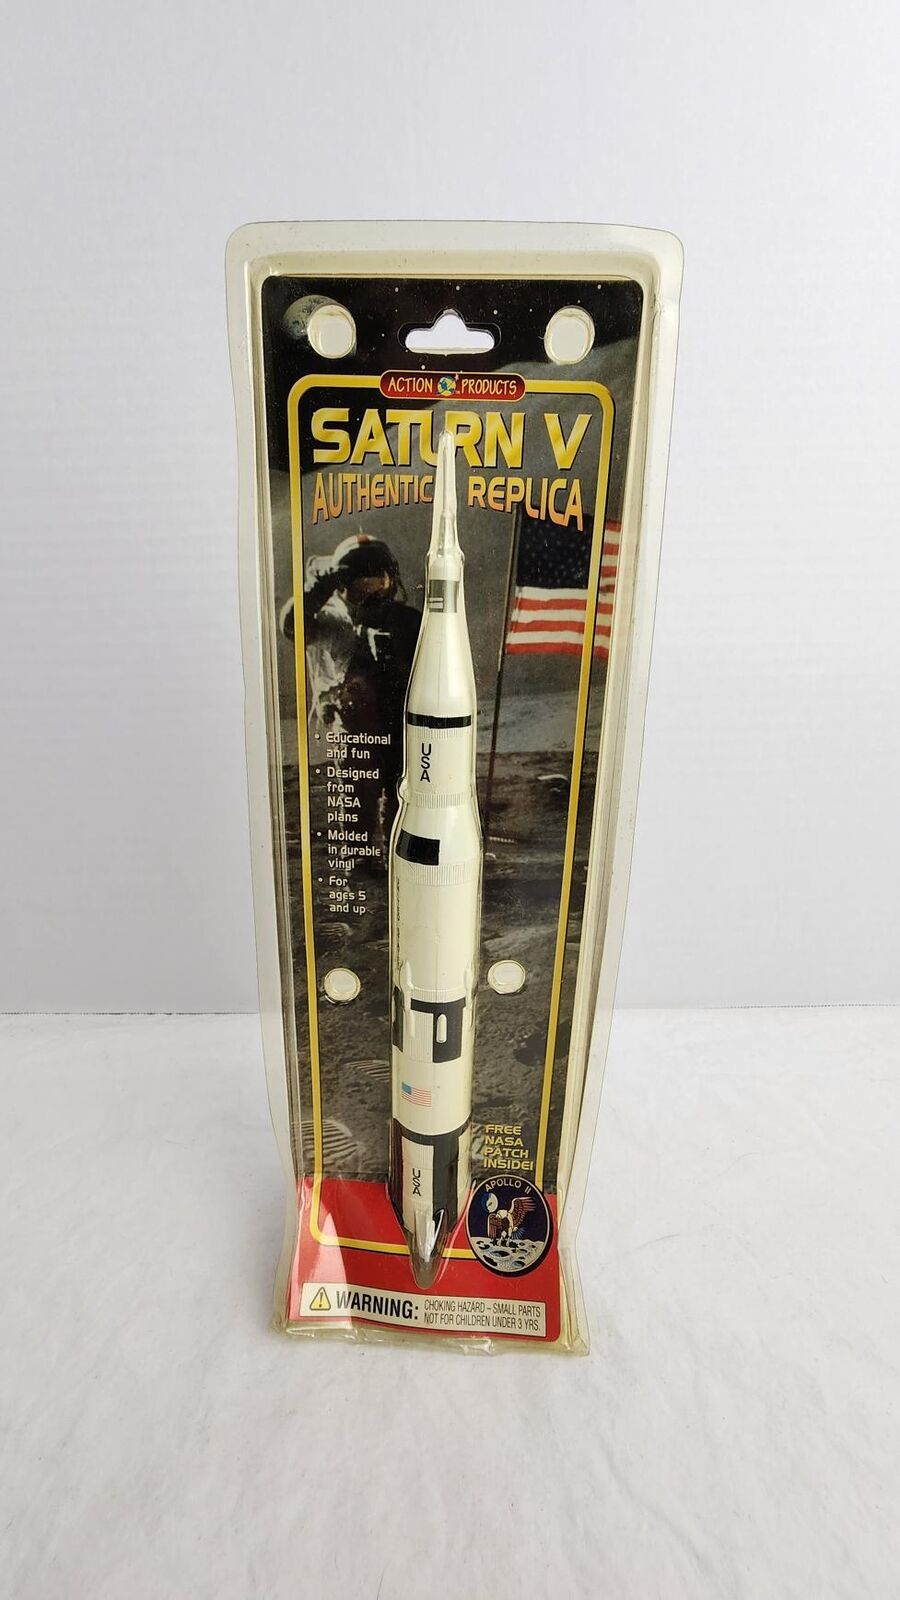 Action Products Saturn V Authentic Replica Rocketship (50206-6) - New in Package